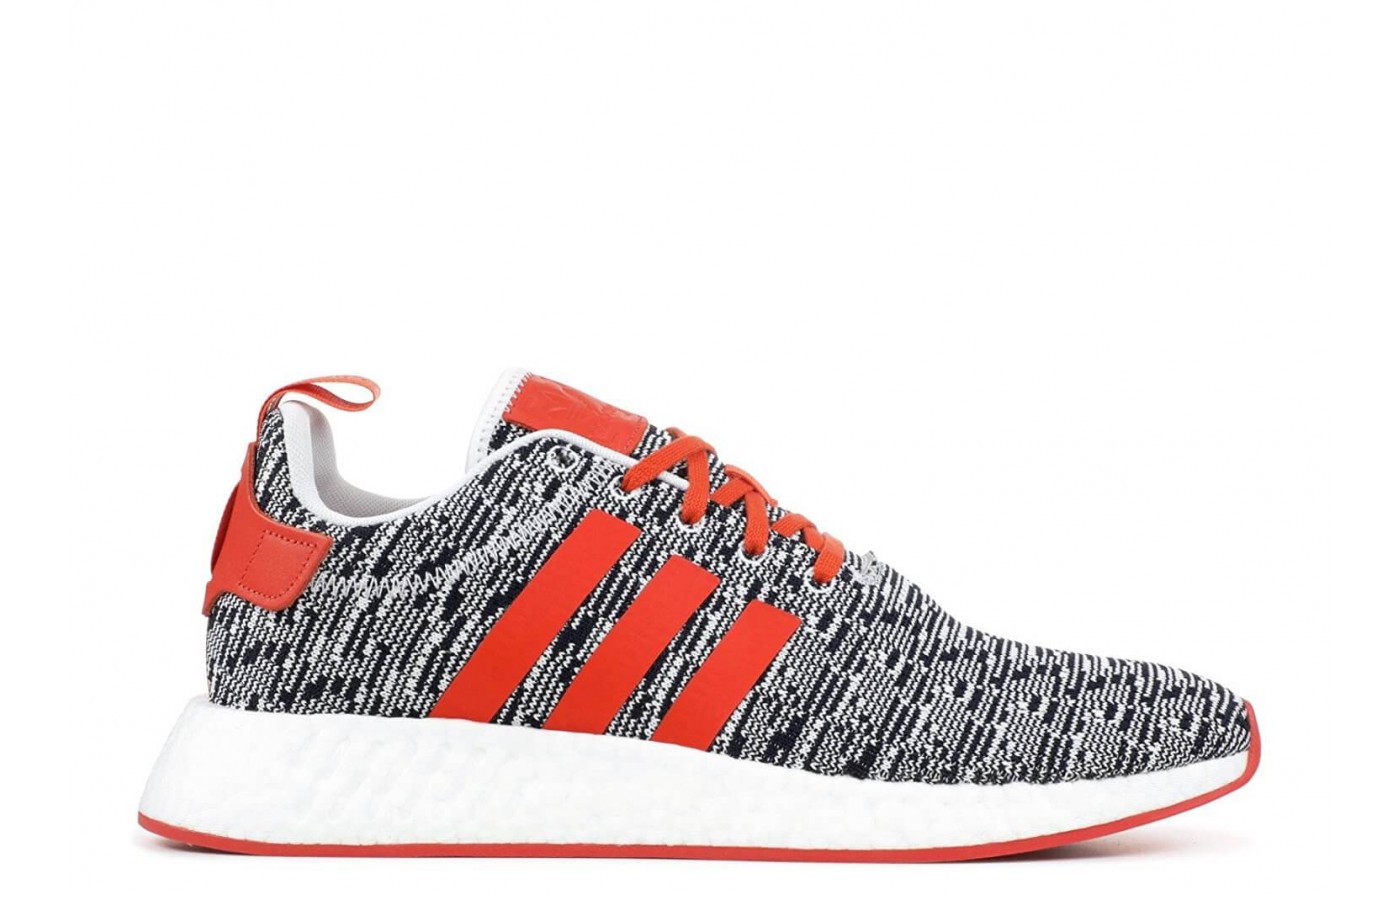 The Adidas NMD R2 in a grey and orange colorway